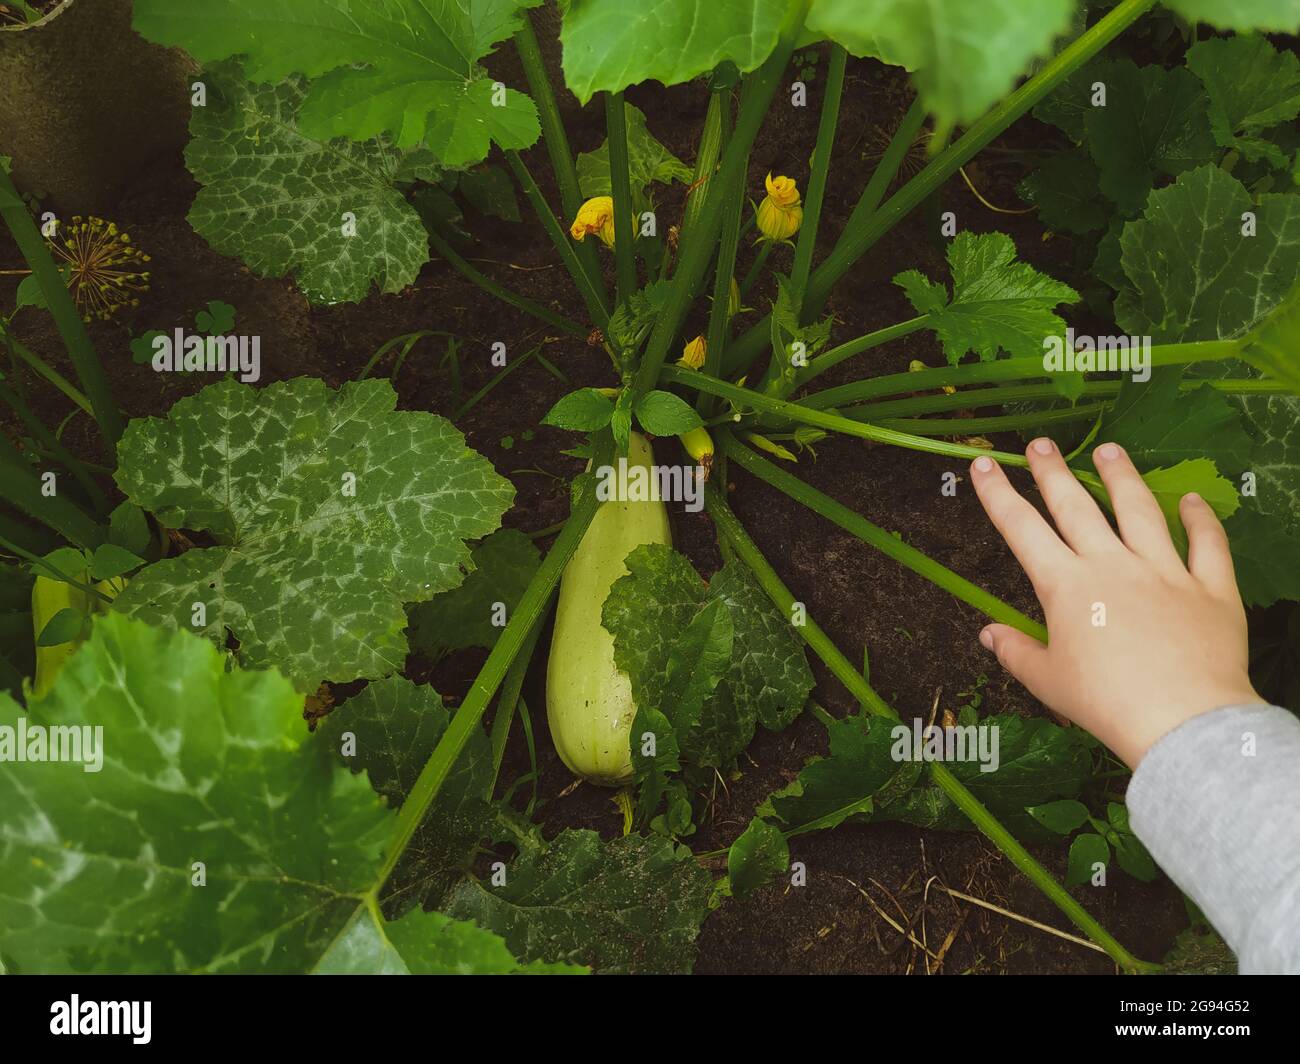 Girl's hand open leaves in a bush of a vegetable marrow in a garden Stock Photo